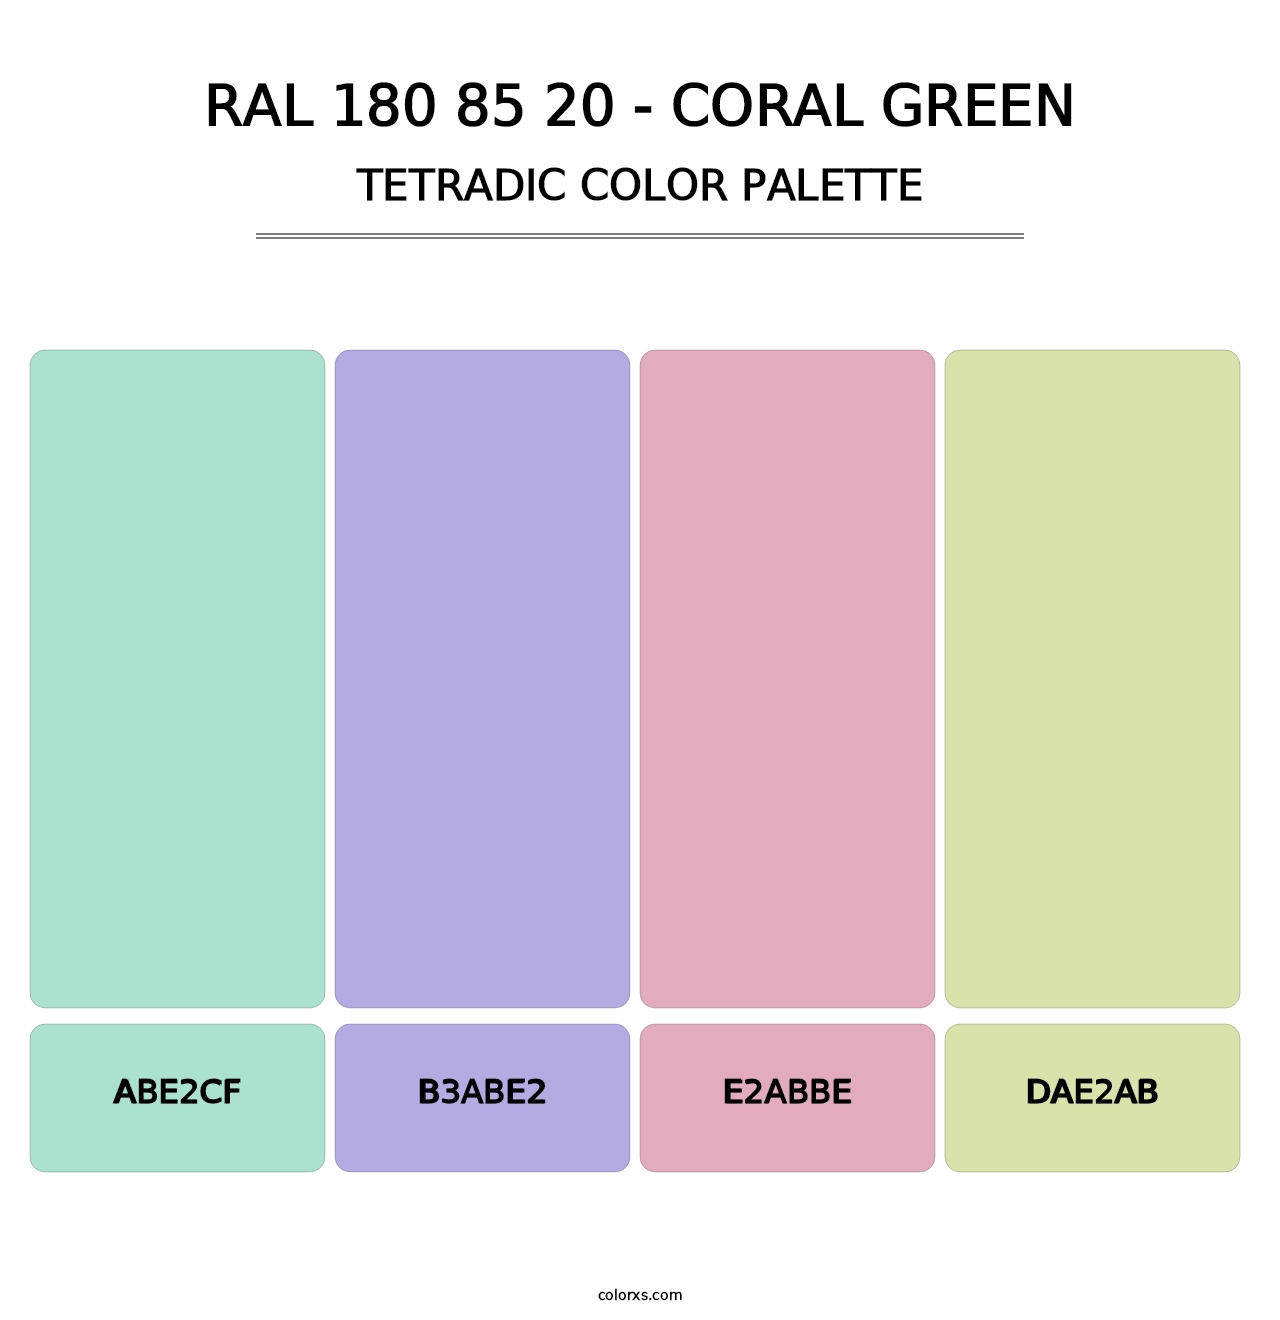 RAL 180 85 20 - Coral Green - Tetradic Color Palette